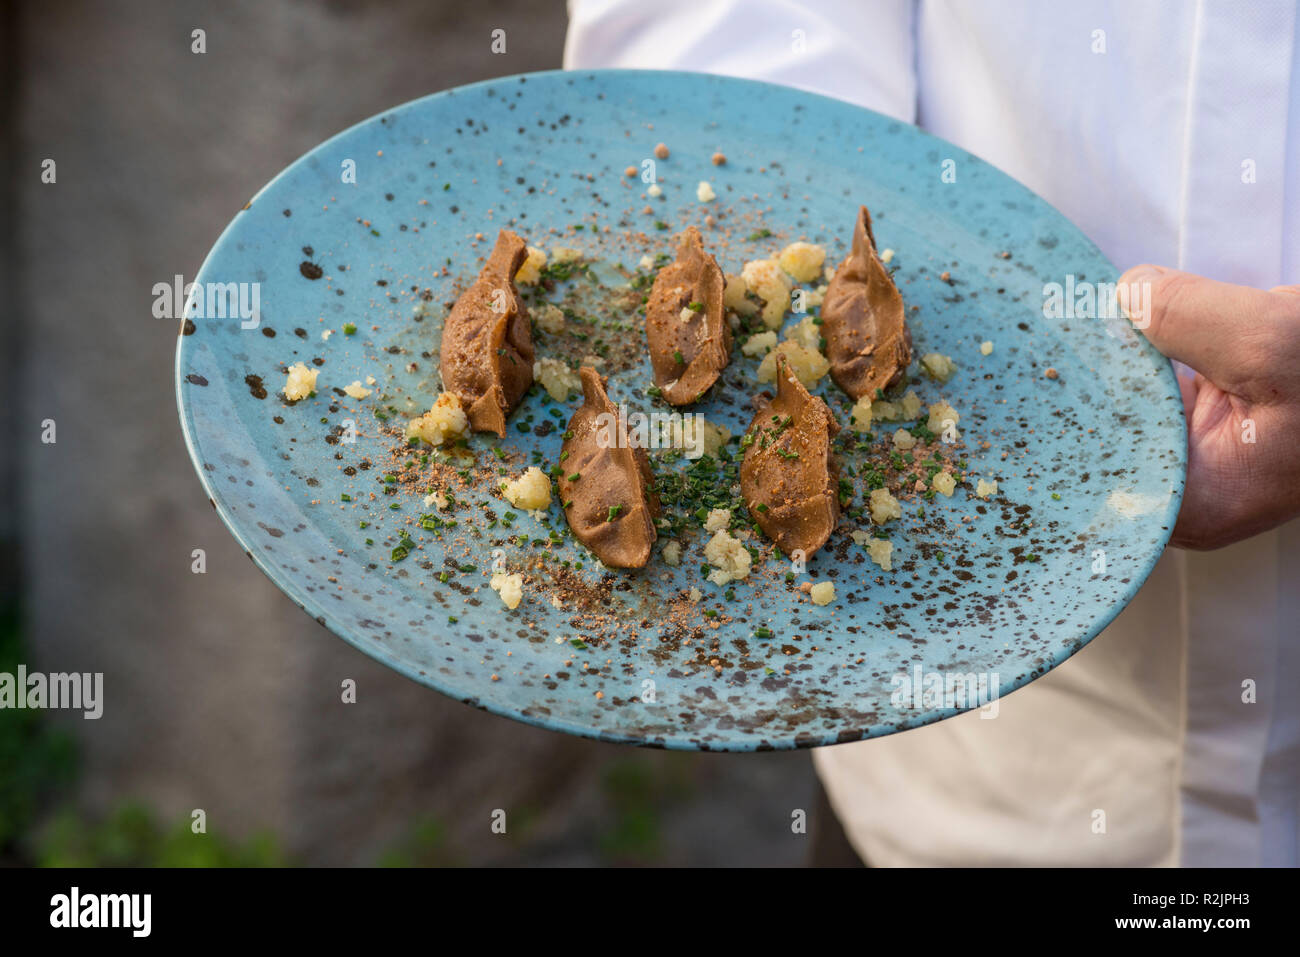 Restaurant Zur Rose High Resolution Stock Photography and Images - Alamy